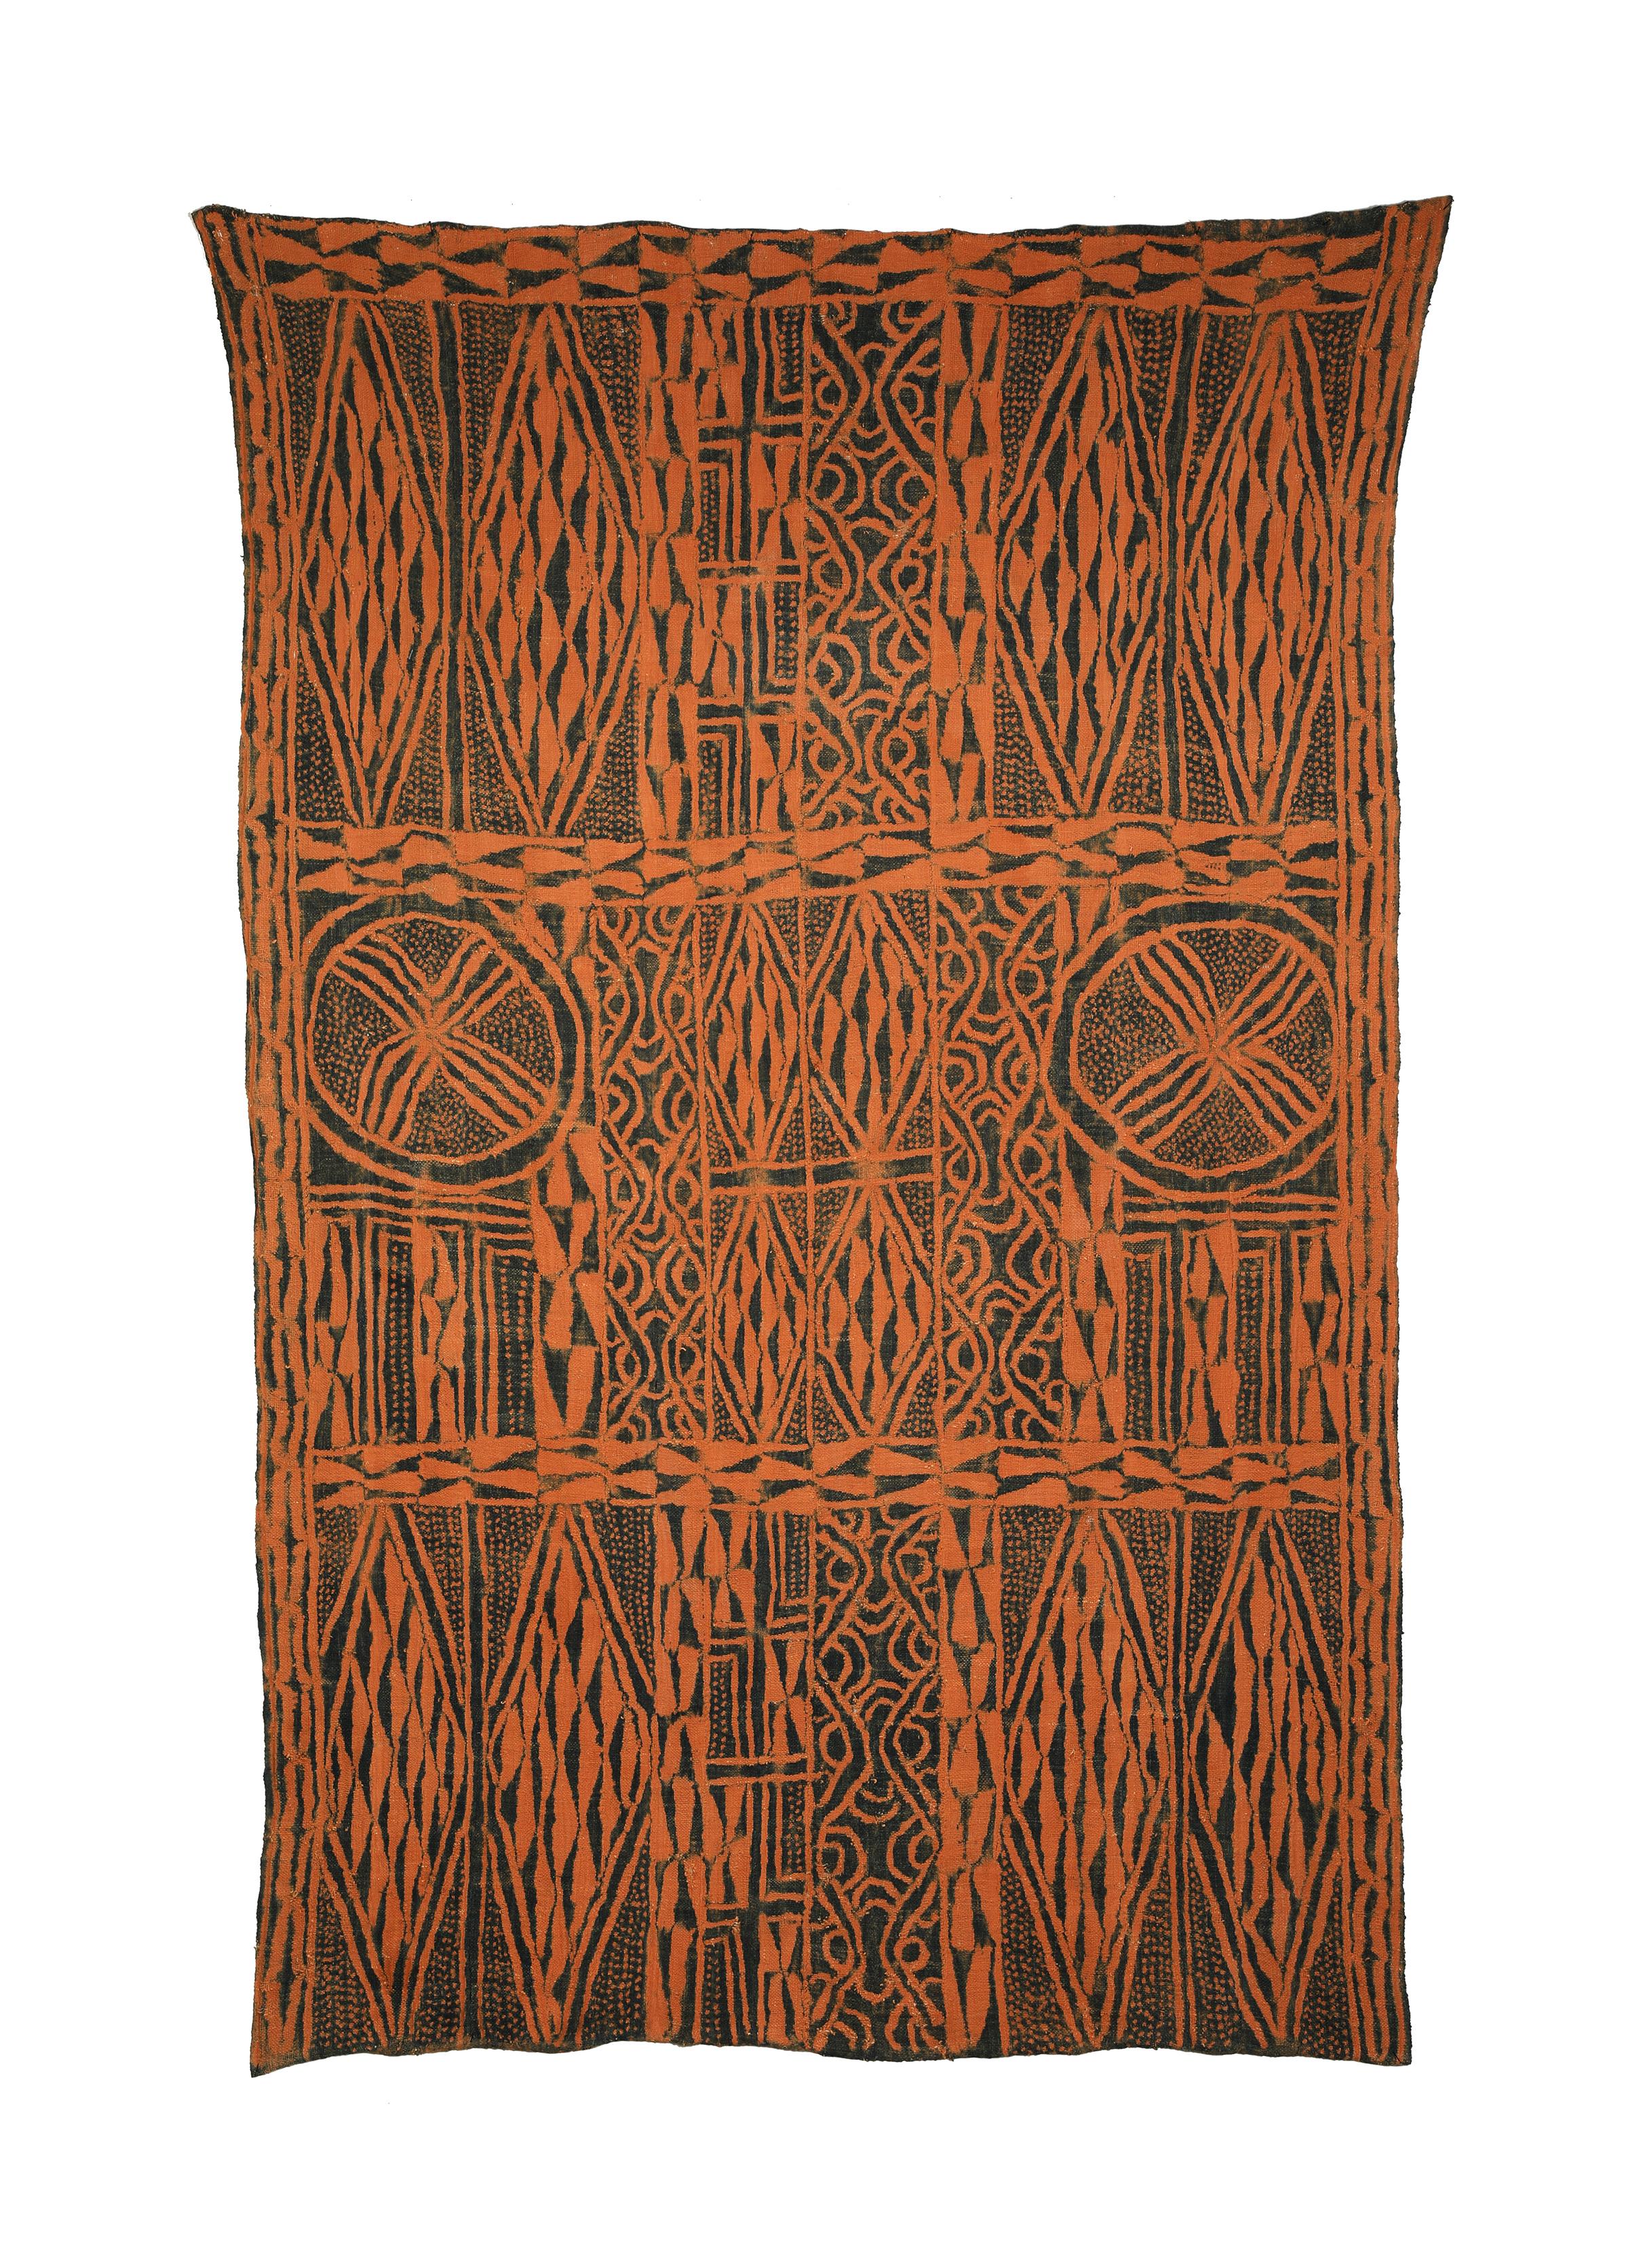 Ndop Panel
Bamileke people
Cameroon Grasslands
Cotton strip weave with a two part dyeing process: stitch-resist indigo dye on a pre-dyed cloth. 
Measures: 39 x 59 1/2 inches (99 x 151 cm)

An exceptionally artistic, hand-drawn composition